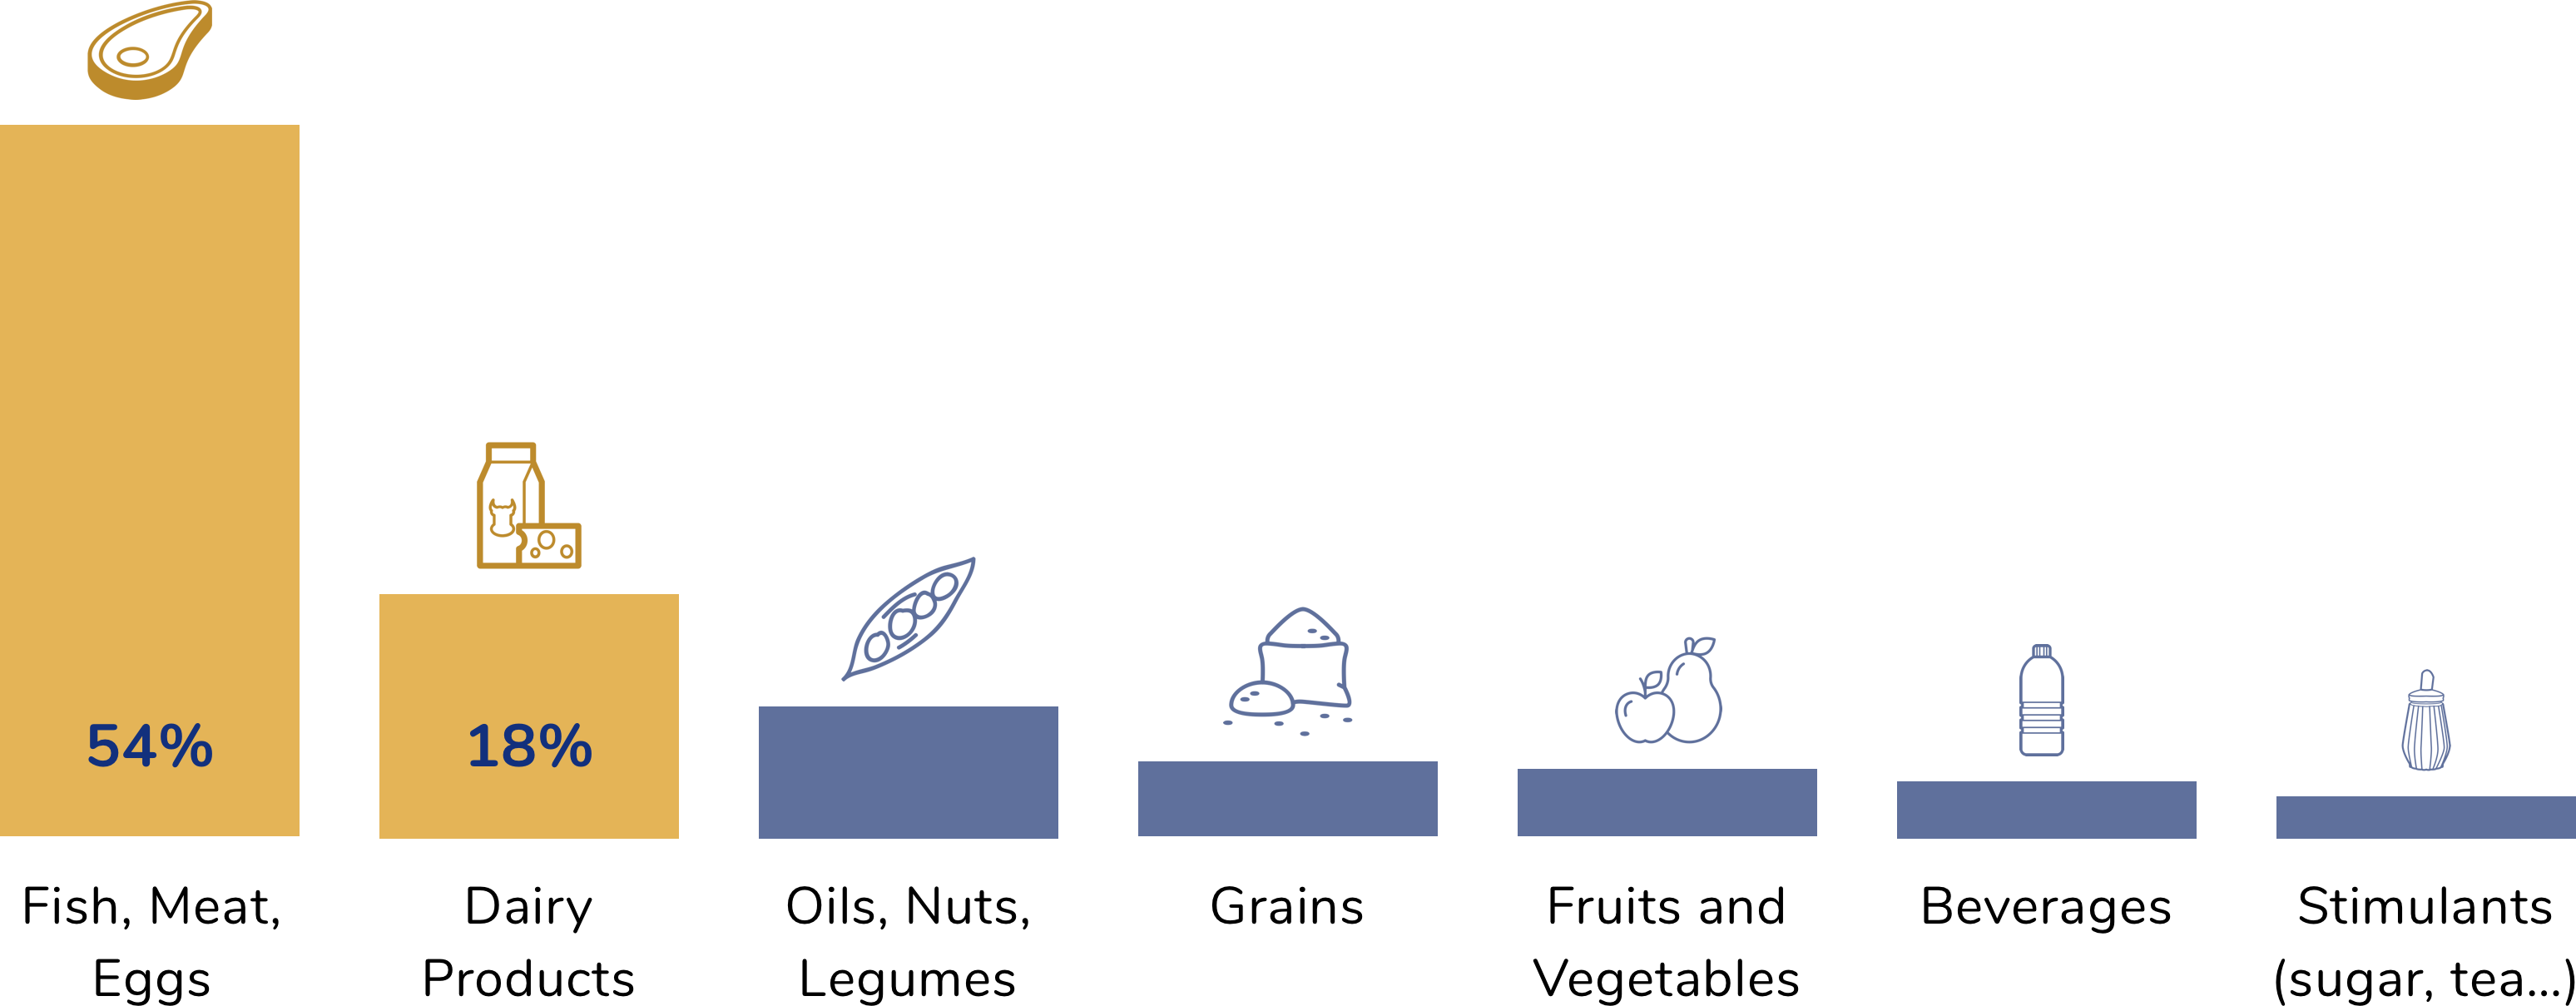 Horizontal bar graph showing footprint produced by various
            types of food, with animal proteins consume 3/4 of the the total
            footprint